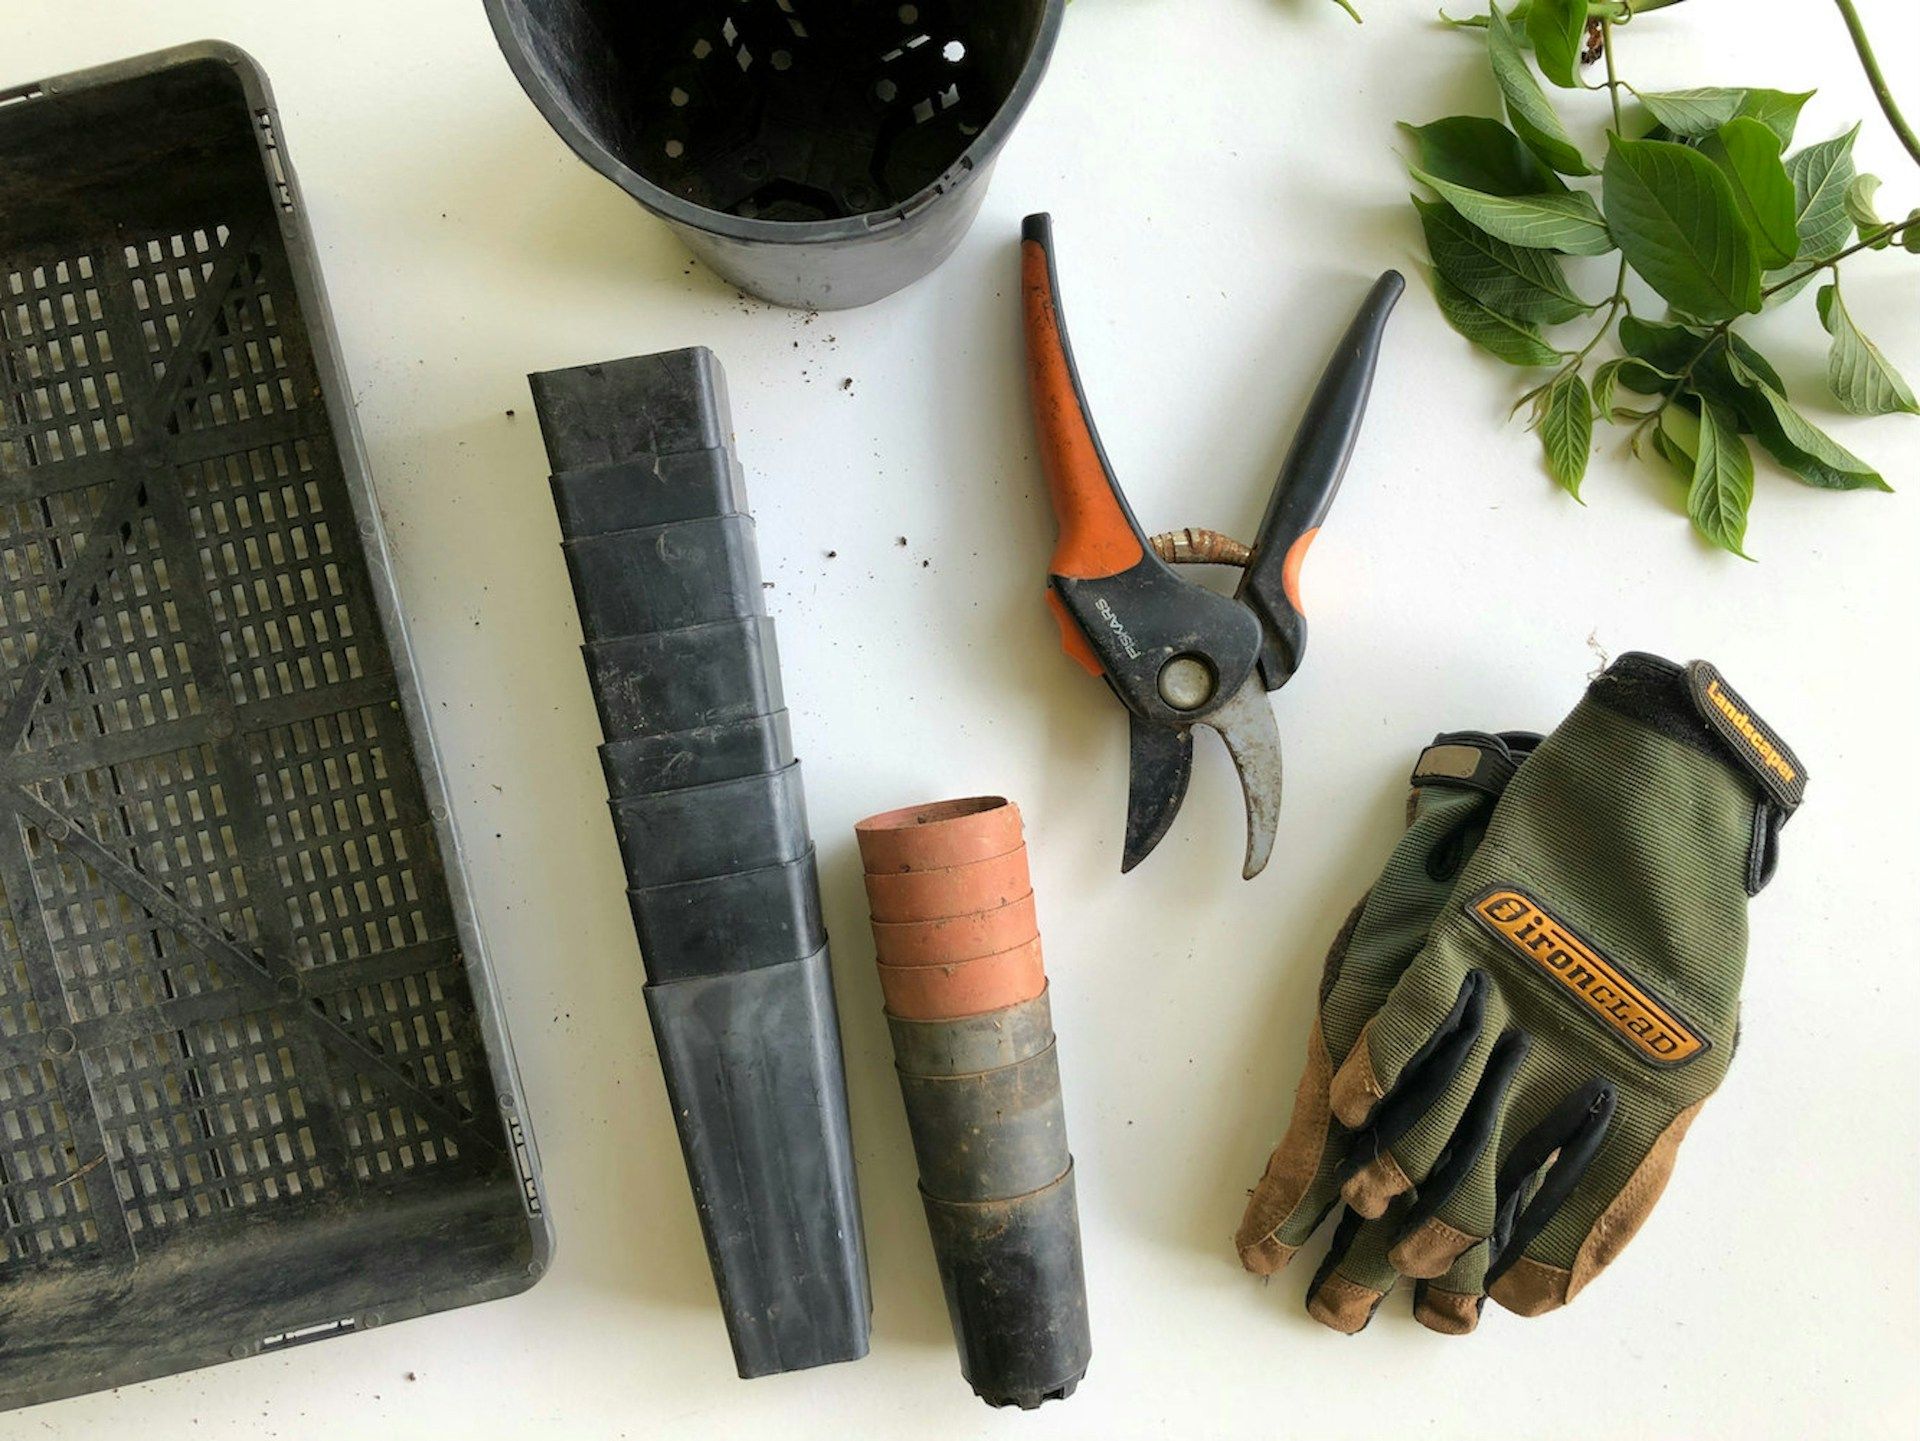 Several gardening tools are laid out on a table.